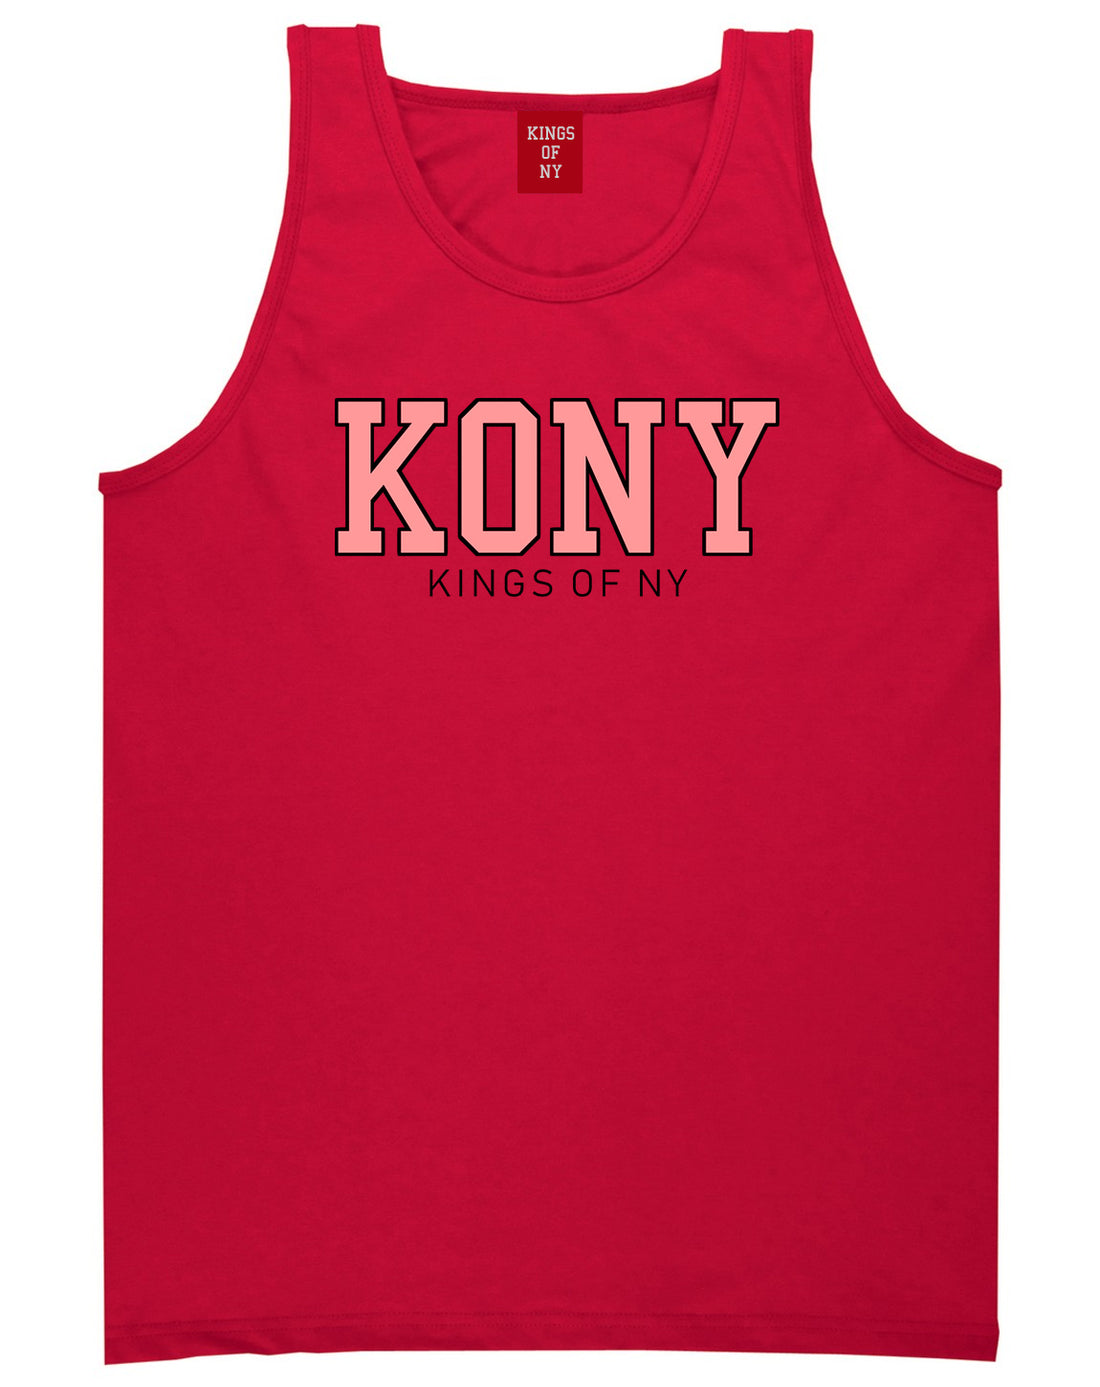 KONY College Mens Tank Top Shirt Red by Kings Of NY